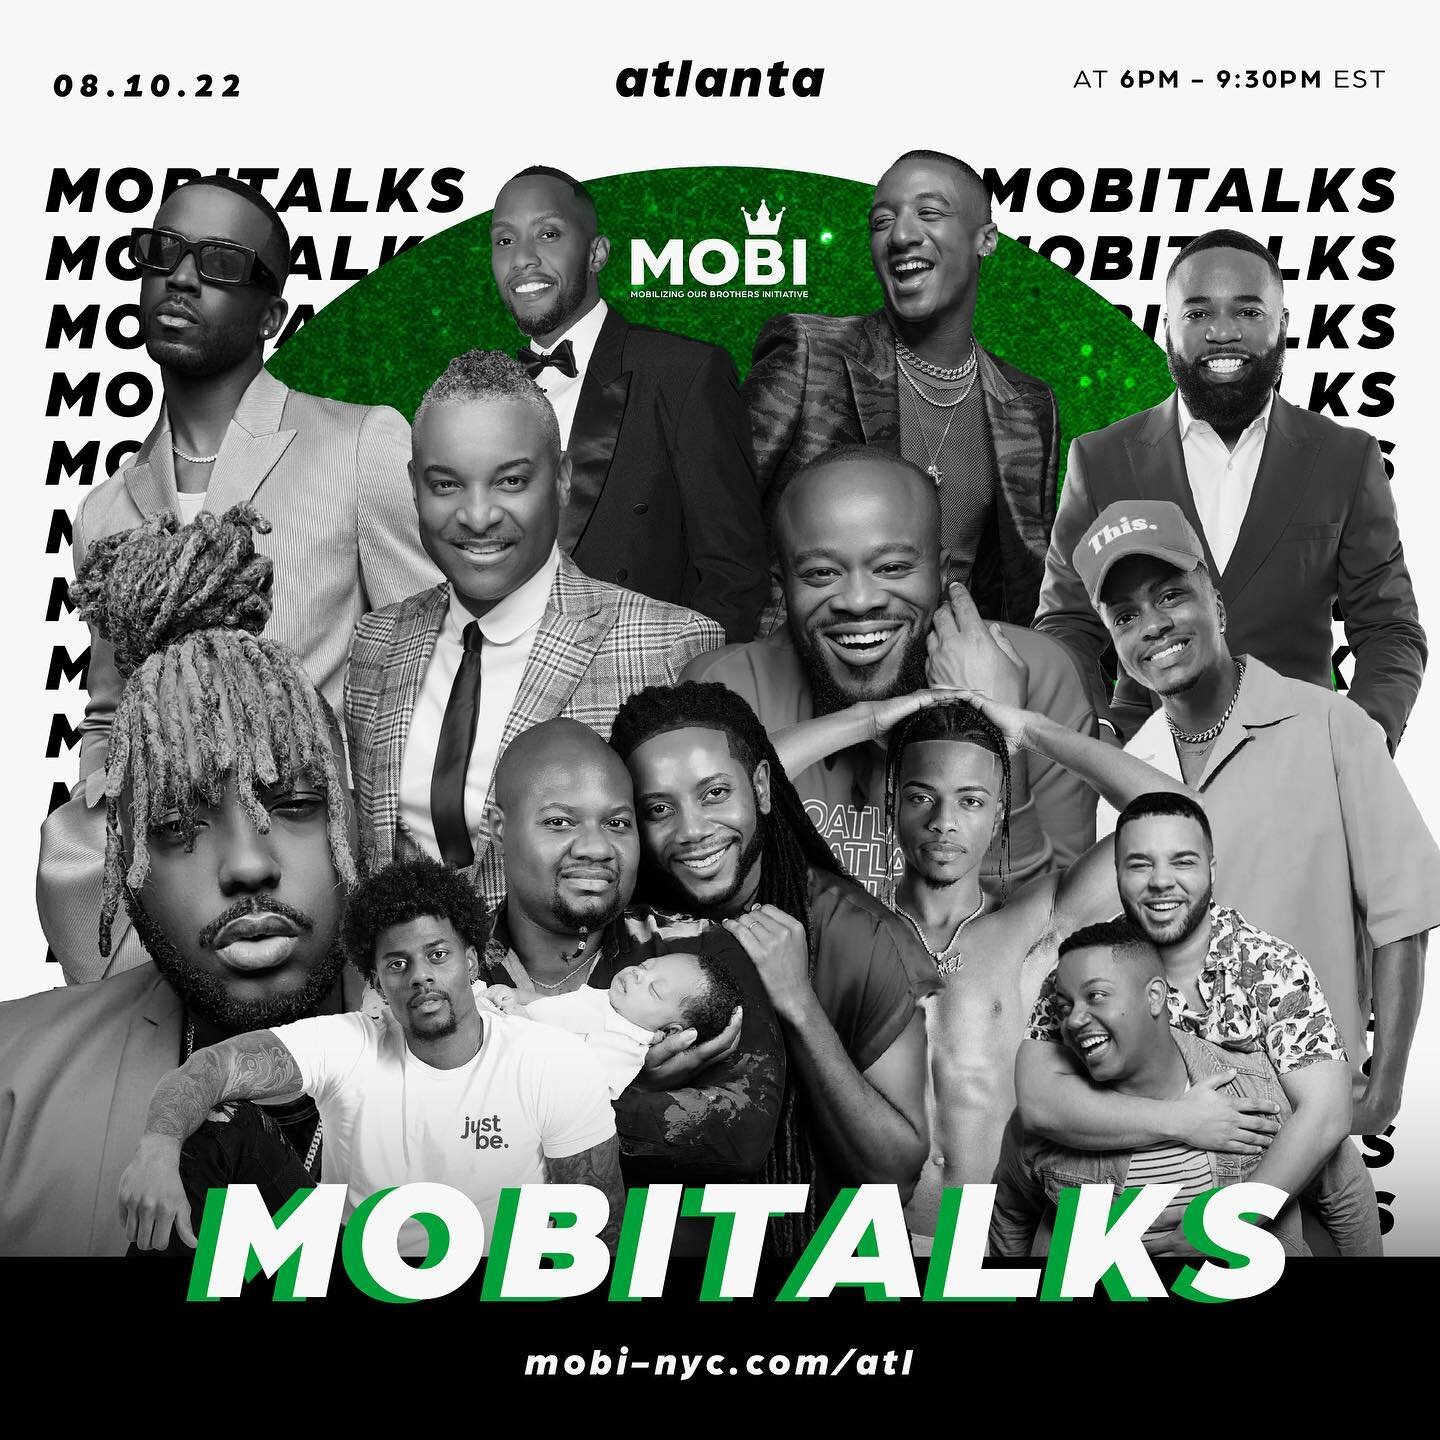 Beyond excited and proud to bring @mobinyc #MOBItalks to ATLANTA!!! 

After 5 years of successful programming in New York City, and across the country, Atlanta gets to experience this very intentional space. MOBItalks ATL features so many natives, cu